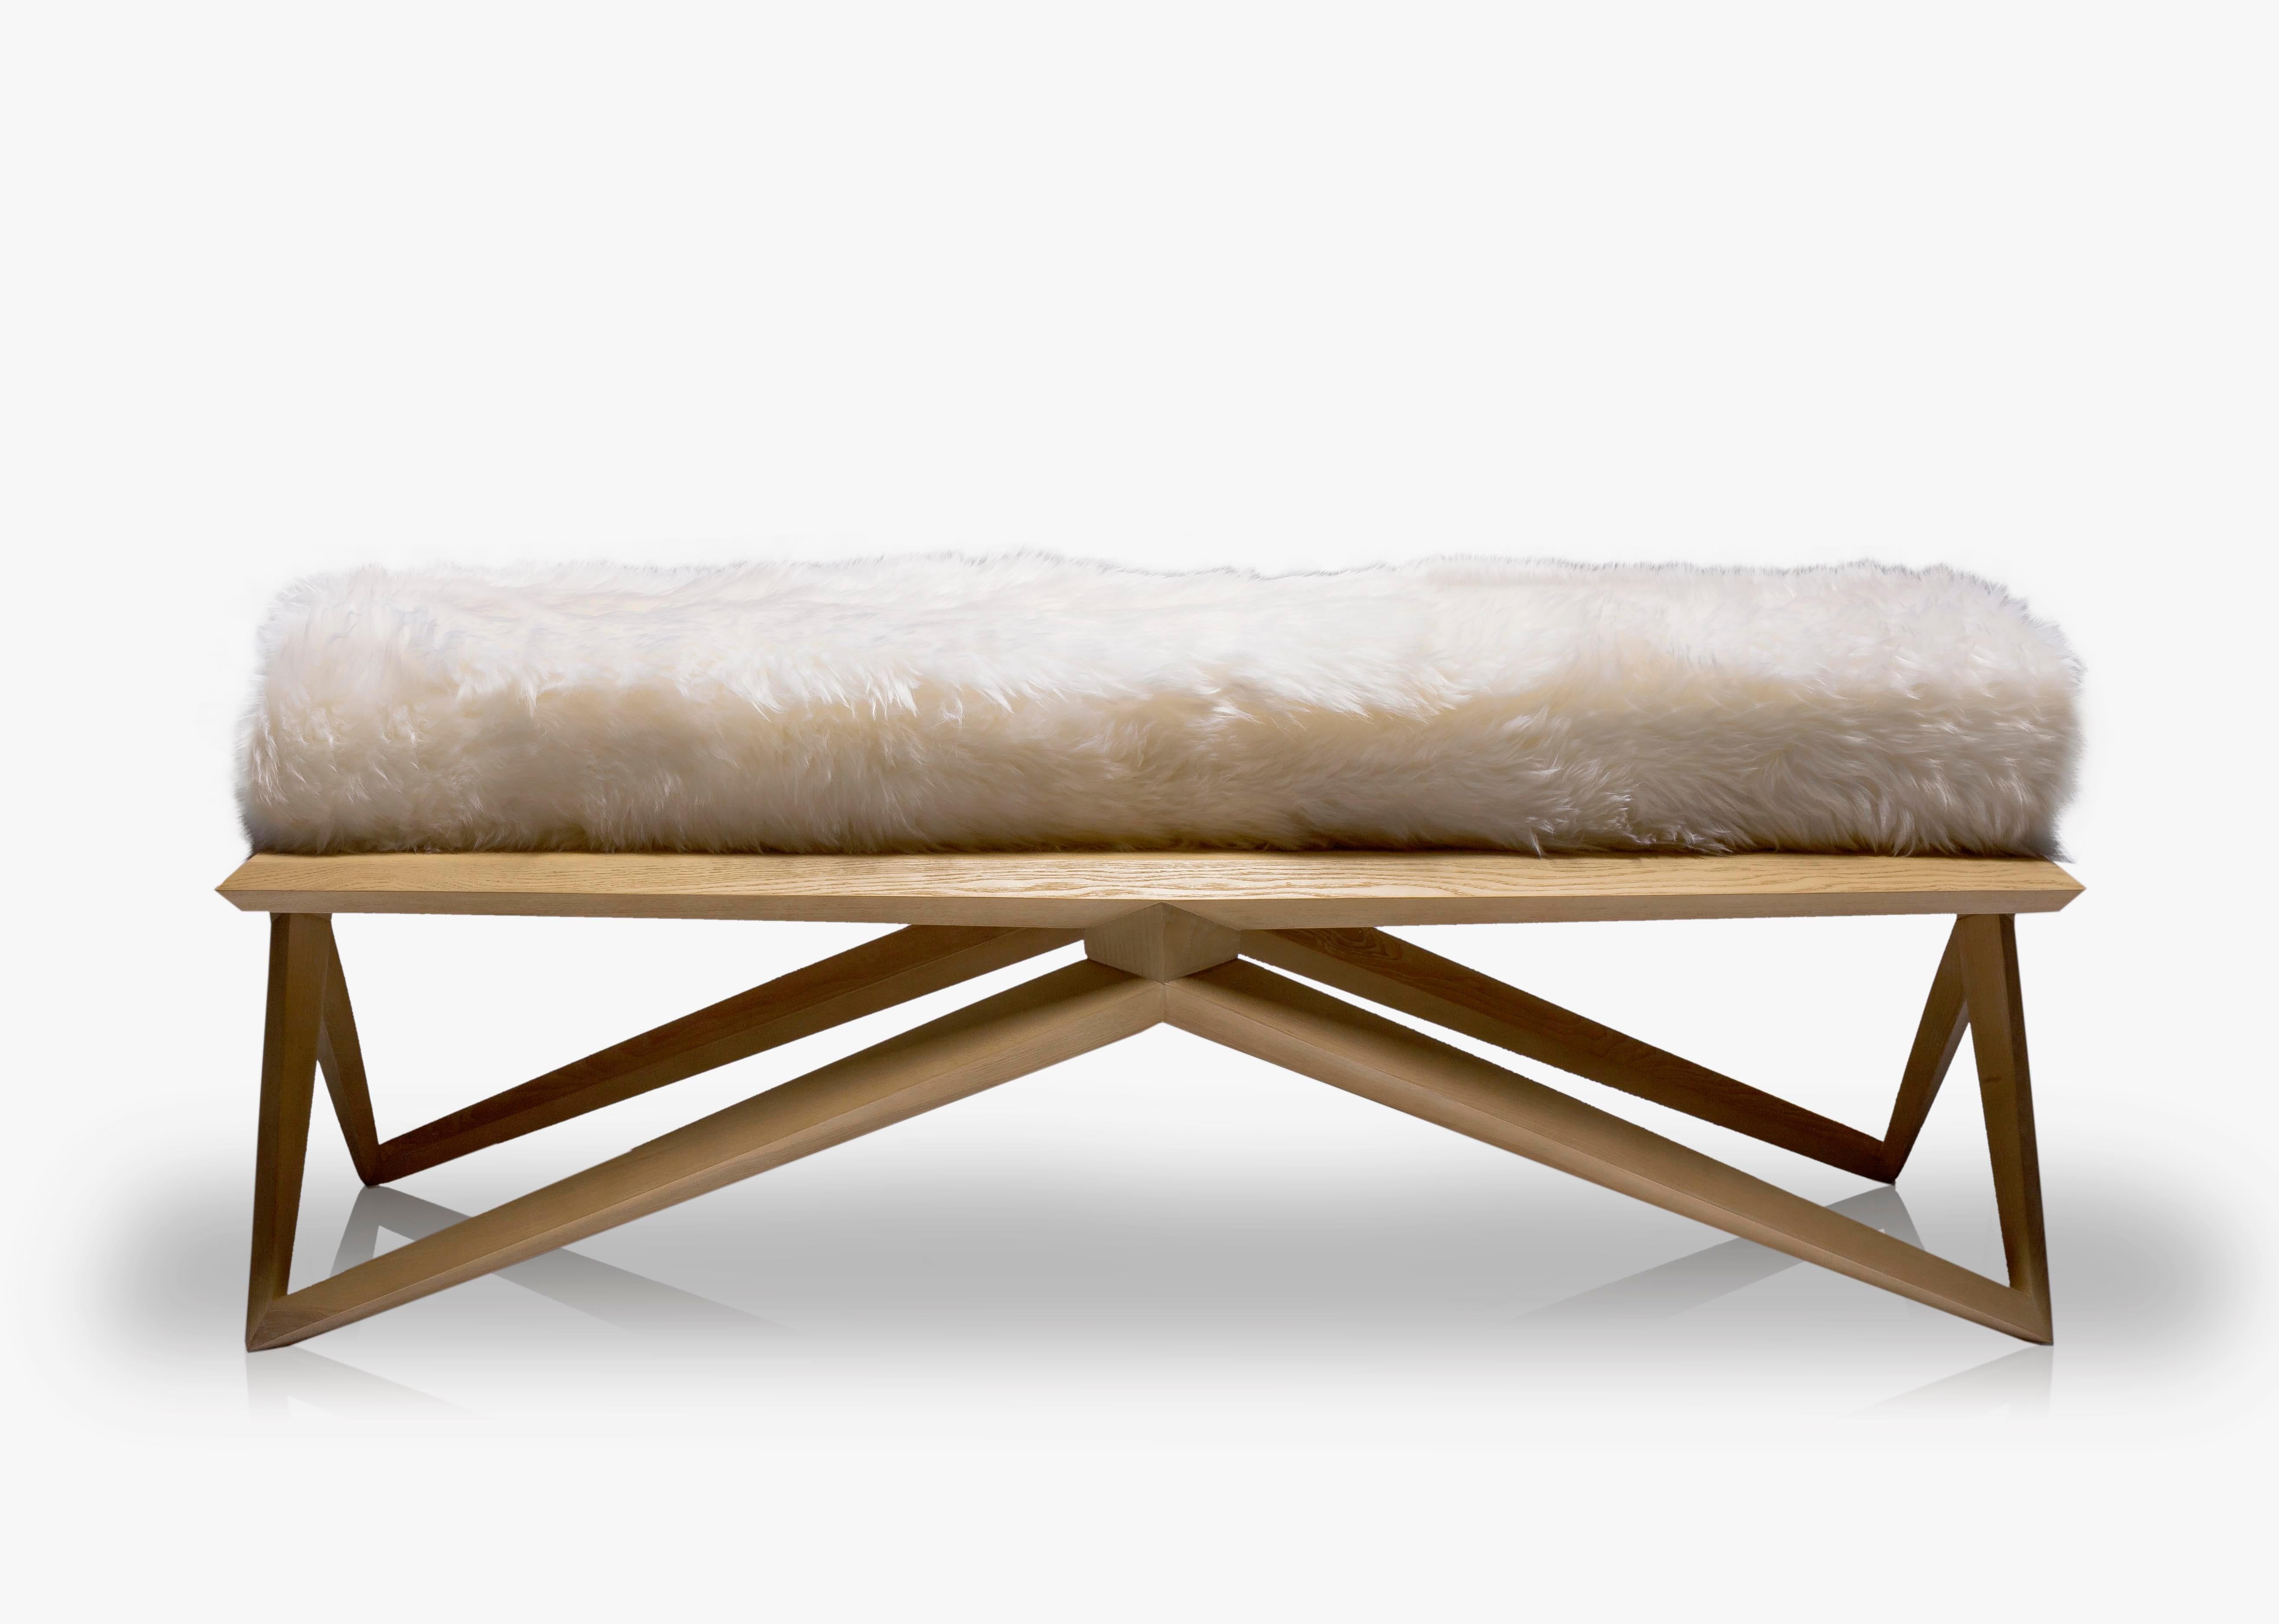 Hand-Crafted Kalix Banquette by Jean Louis Deniot for Marc de Berny For Sale